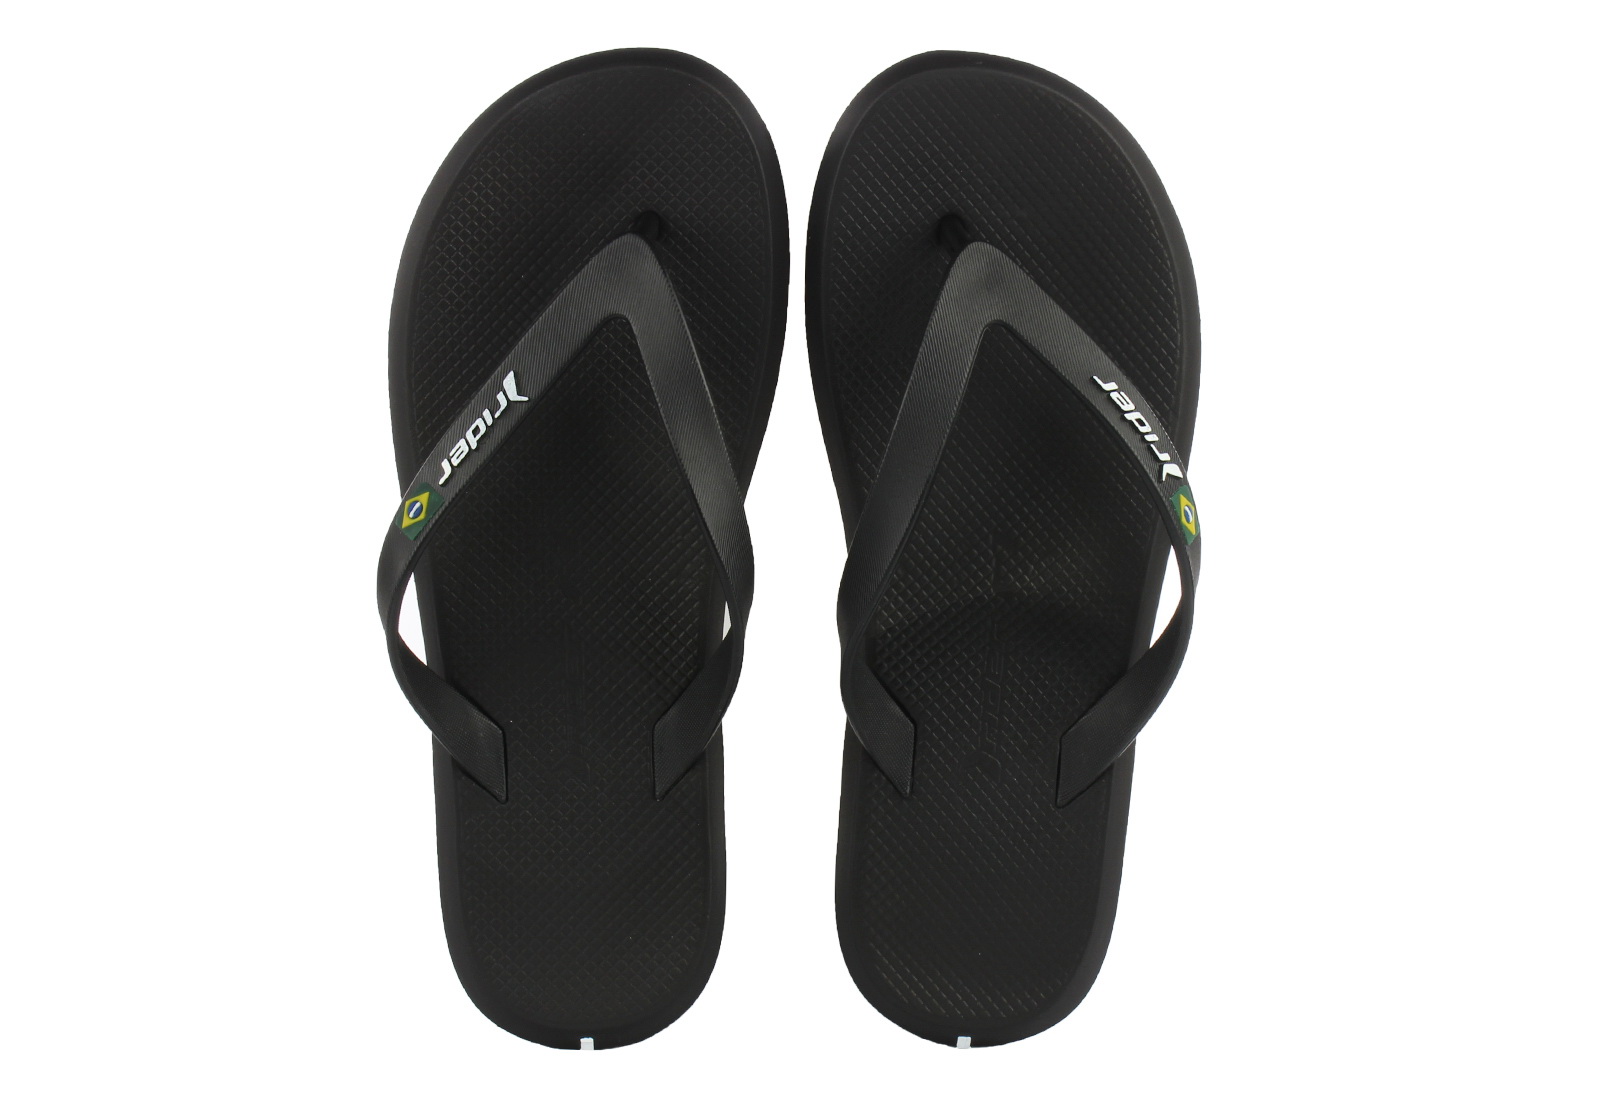 Rider Slippers - R1 - 10594-20780 - Online shop for sneakers, shoes and ...